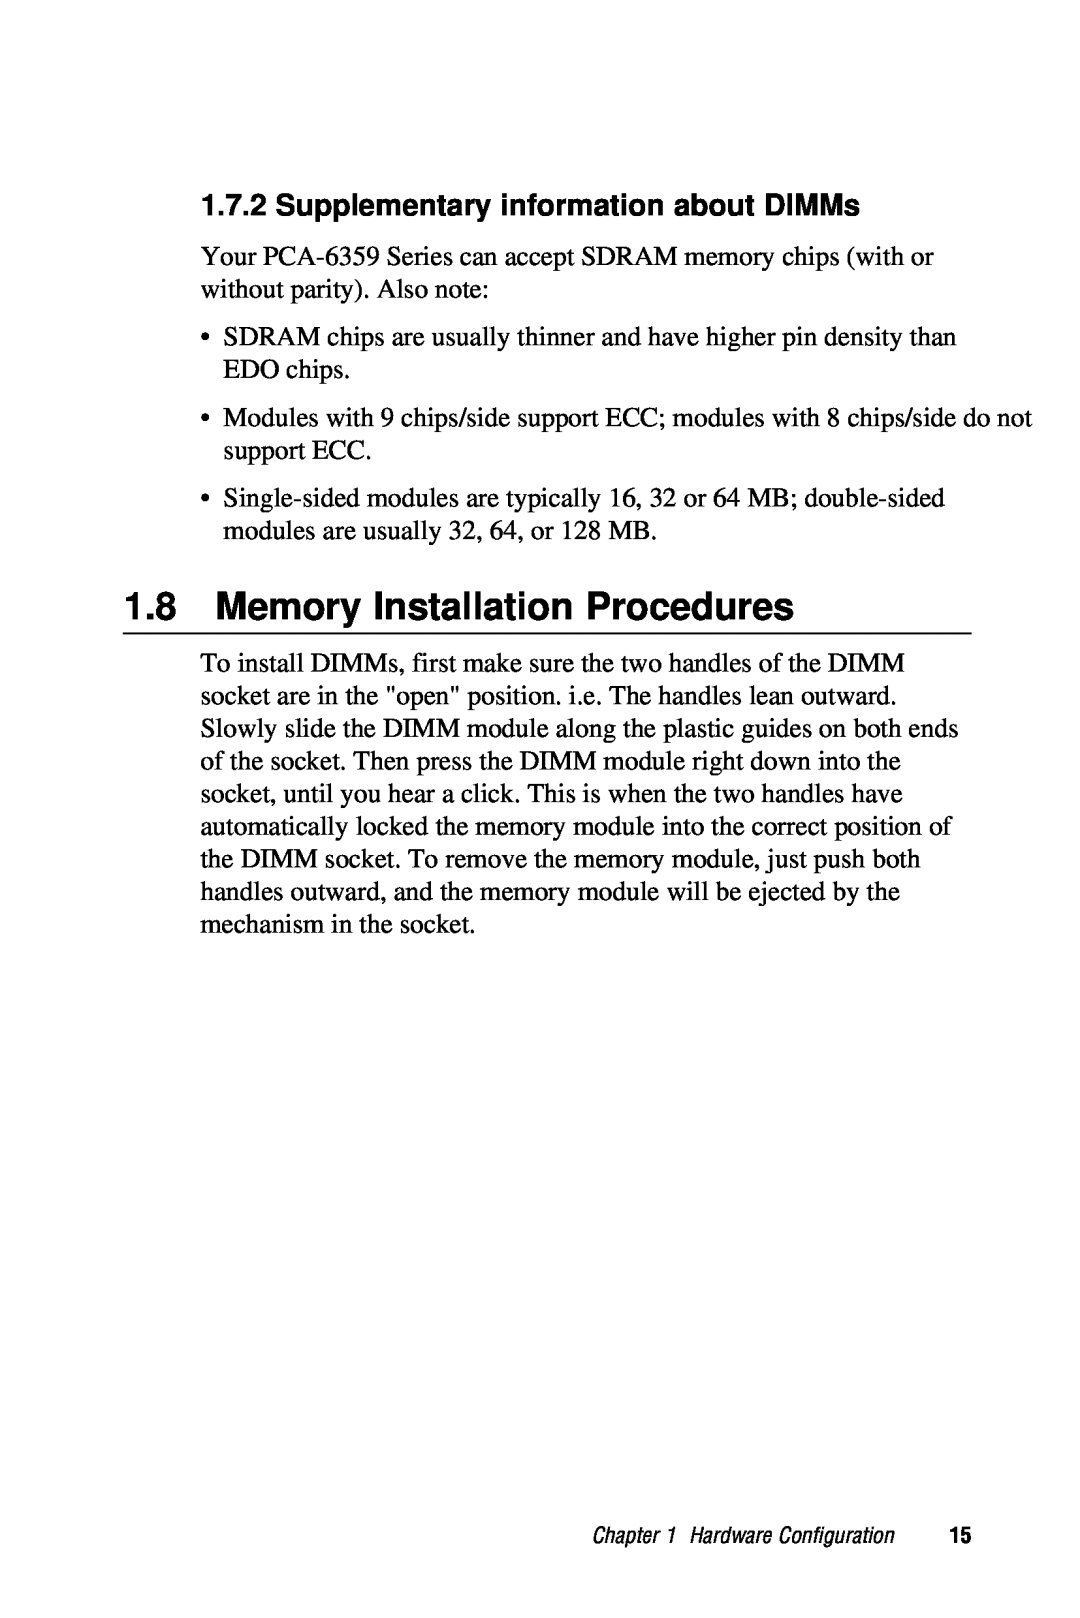 Advantech PCA-6359 user manual Memory Installation Procedures, Supplementary information about DIMMs 